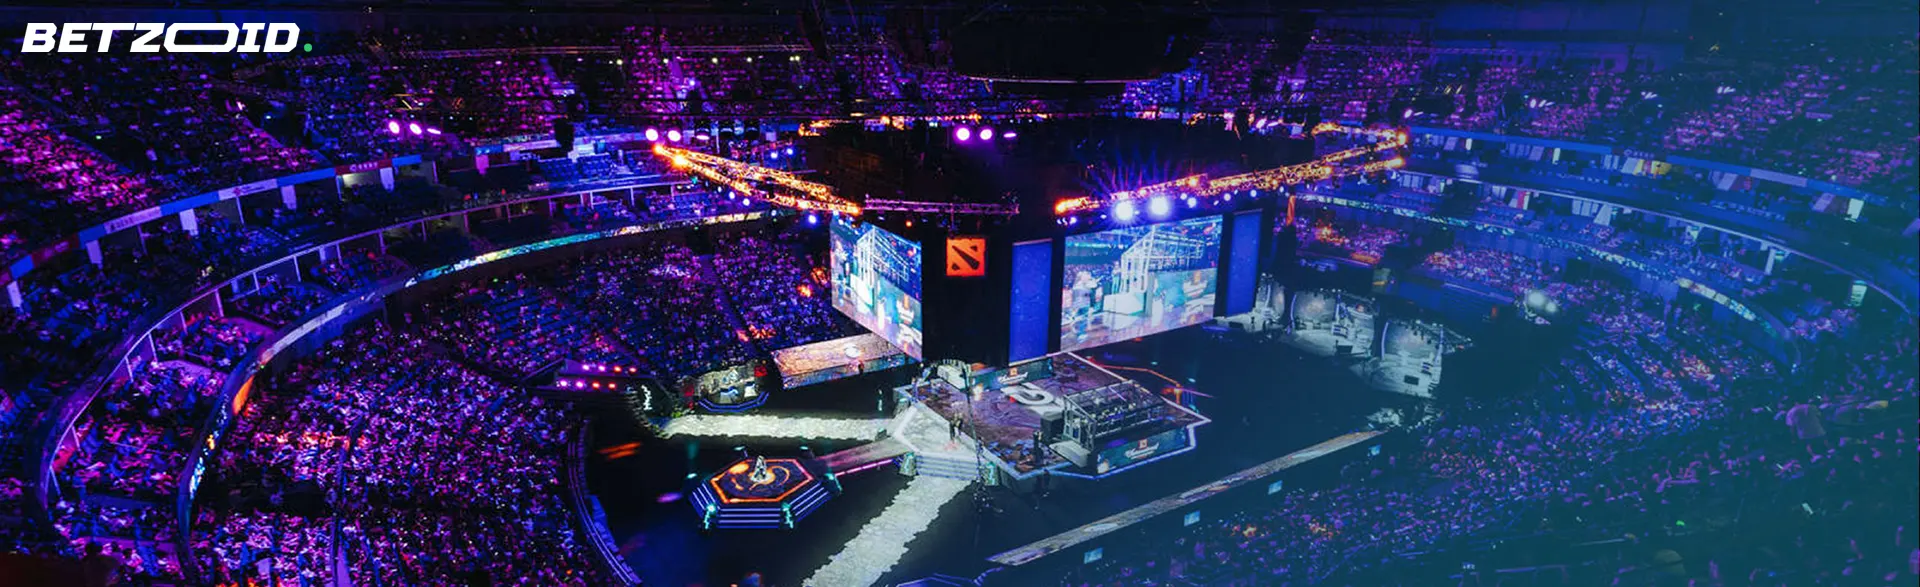 Esports arena with Dota 2 event for Canadian Dota 2 gambling sites.